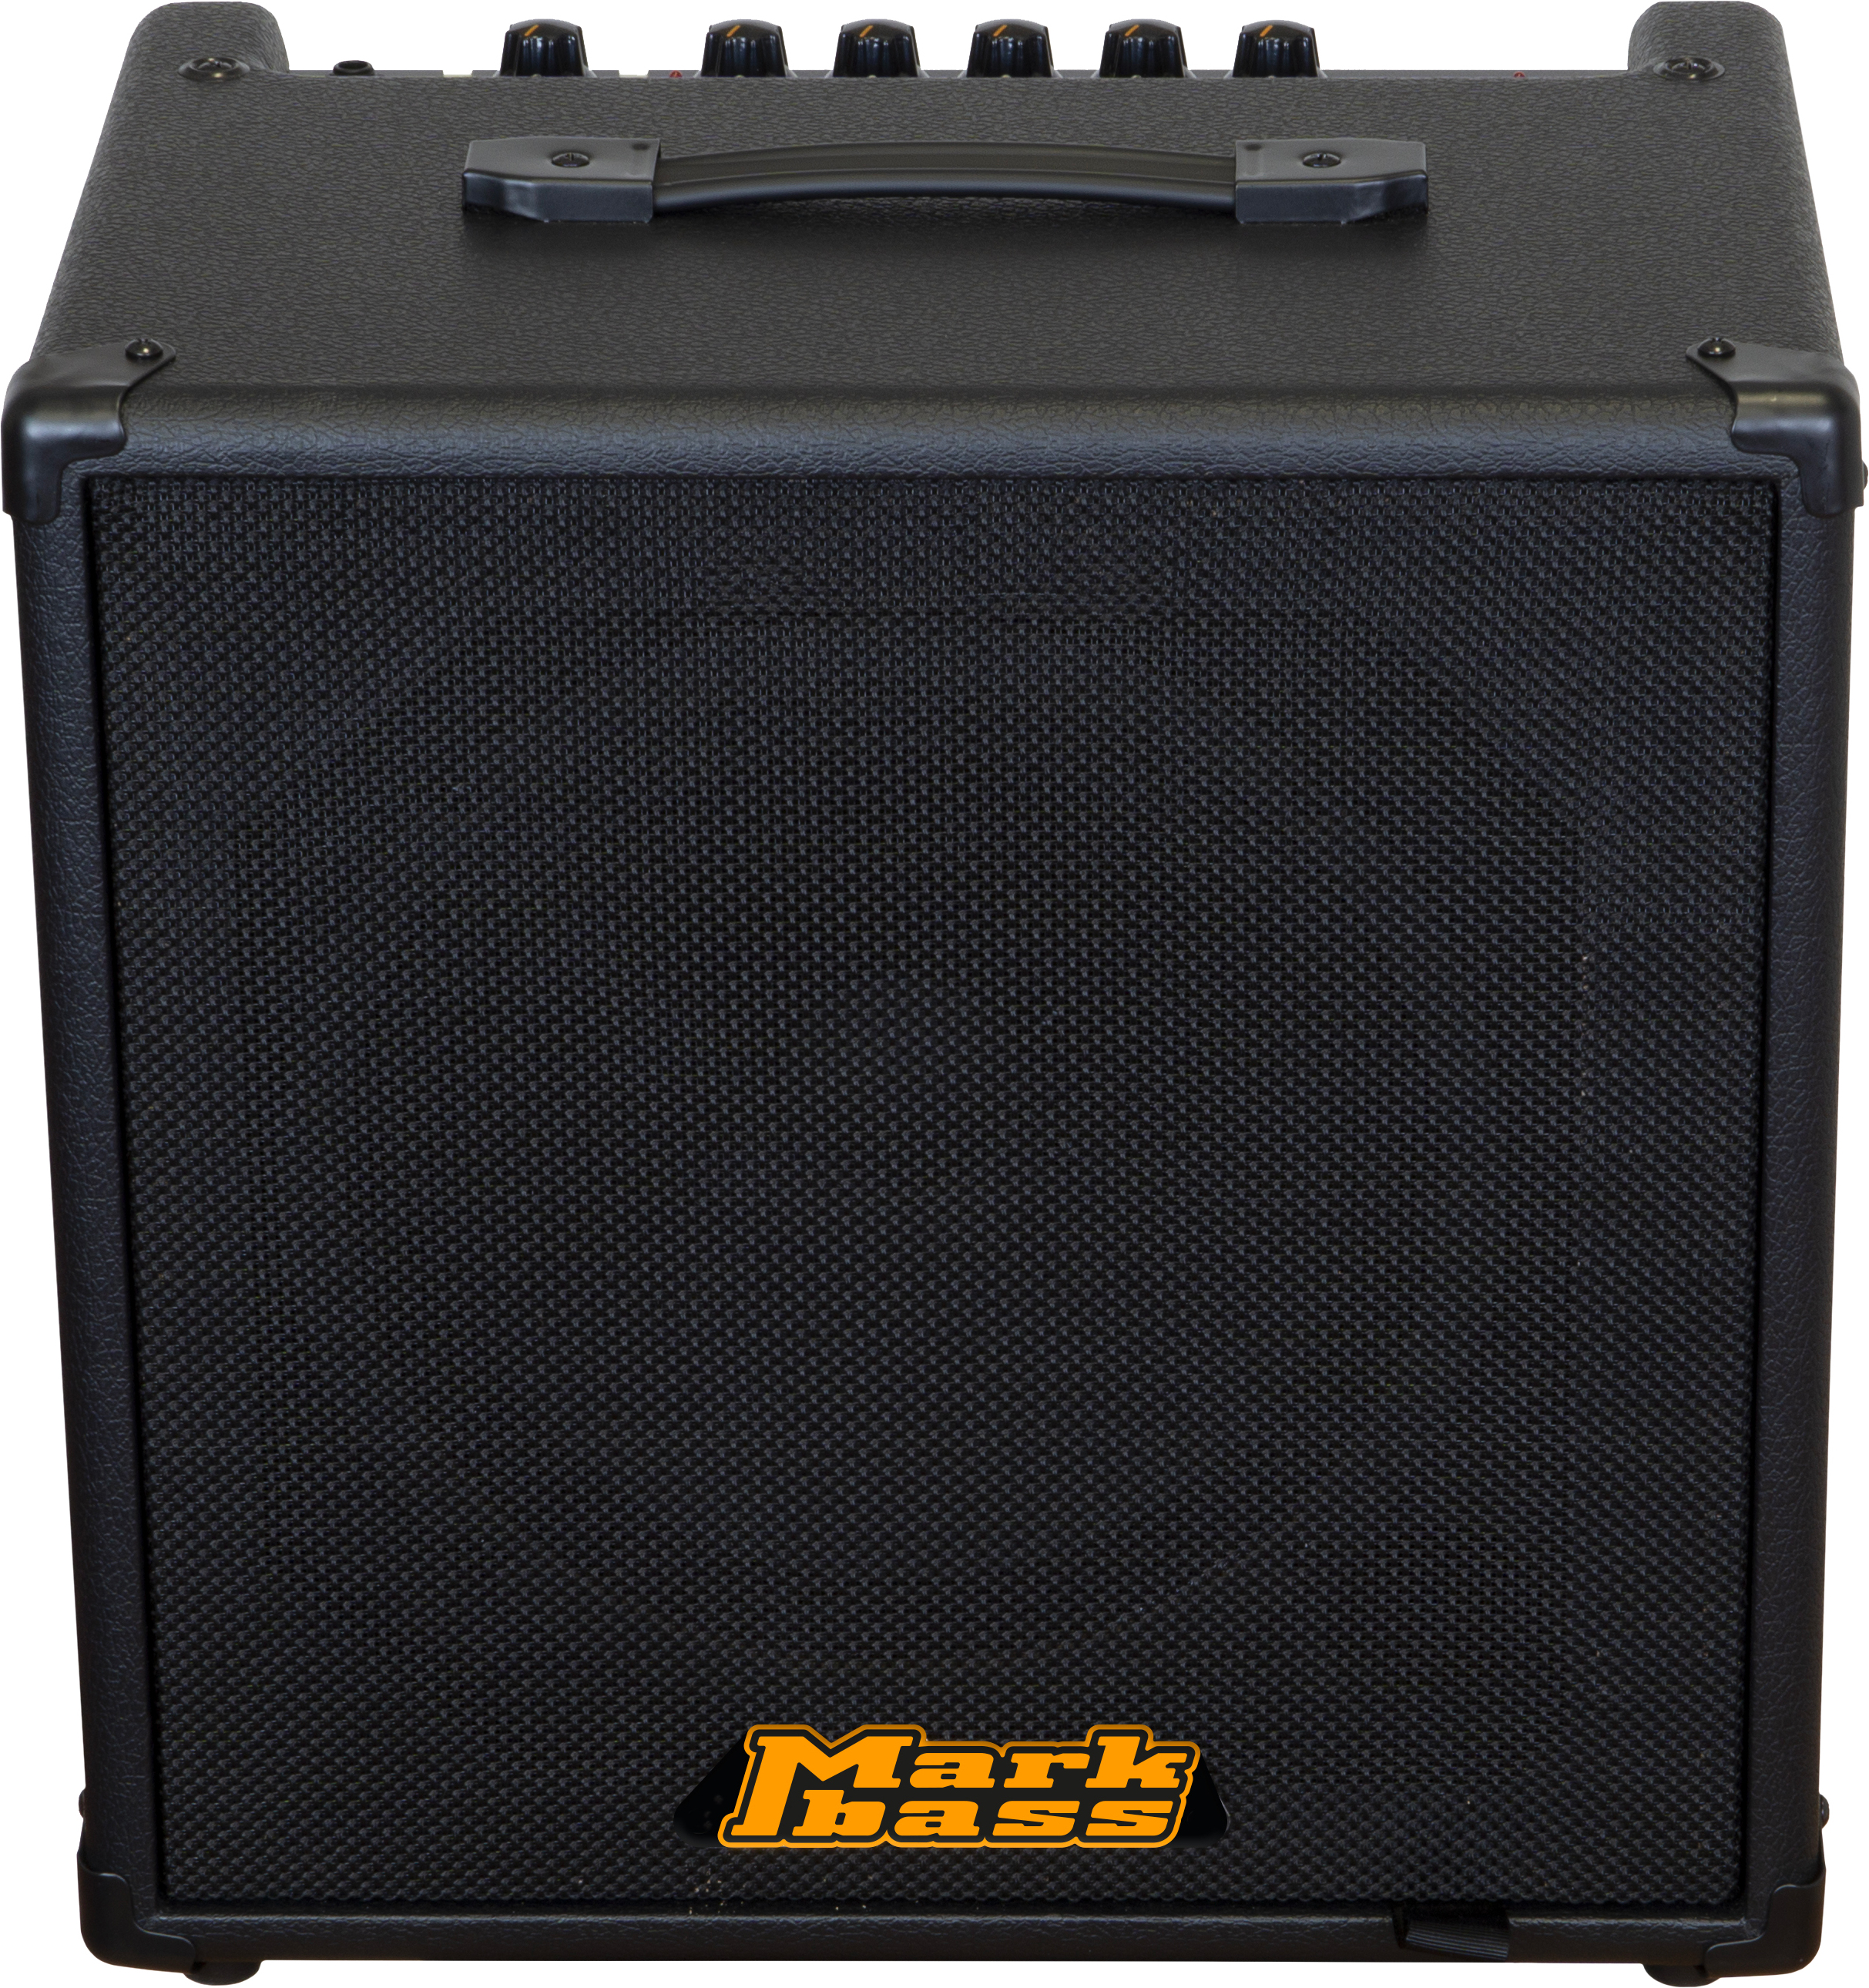 Markbass Cmb 101 Black Line Combo 40w 1x10 - Combo voor basses - Main picture